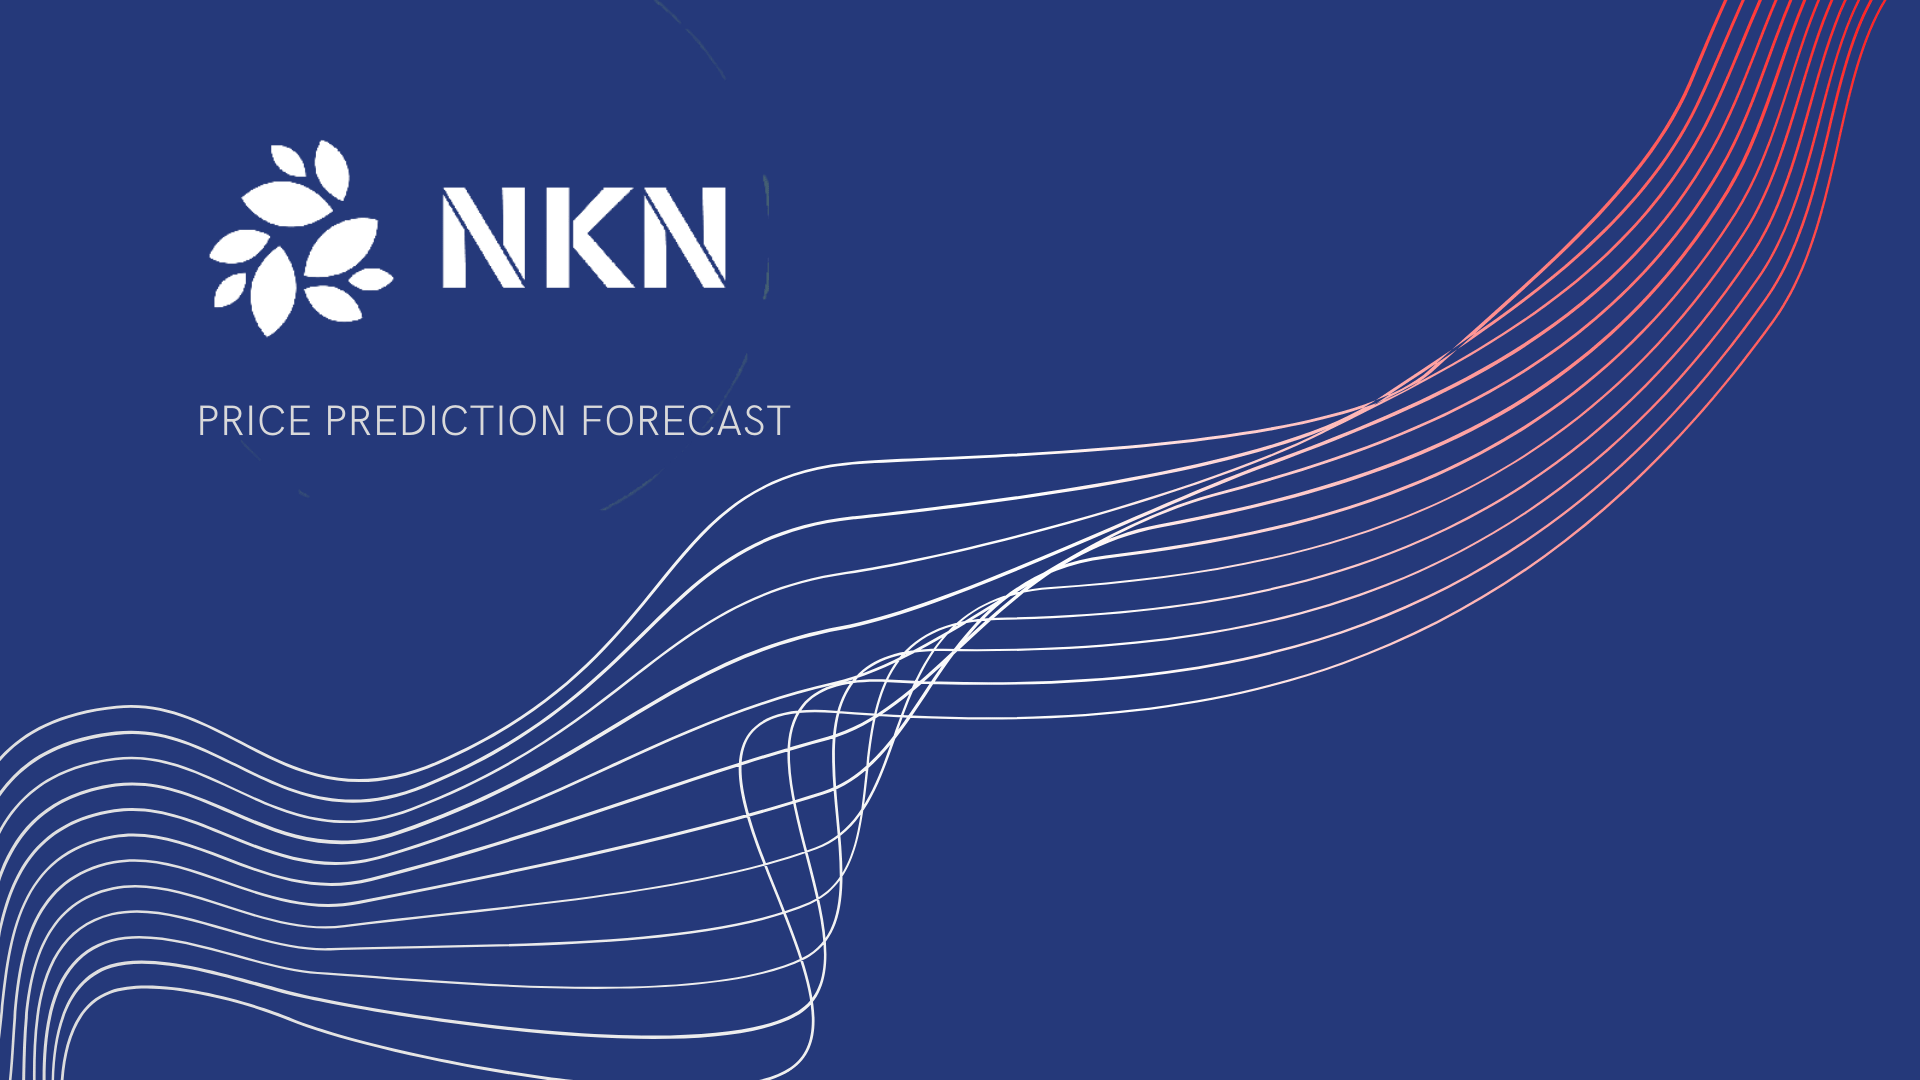 NKN Price Prediction 2022, Full Review & Details Available Now, Find Out Latest News